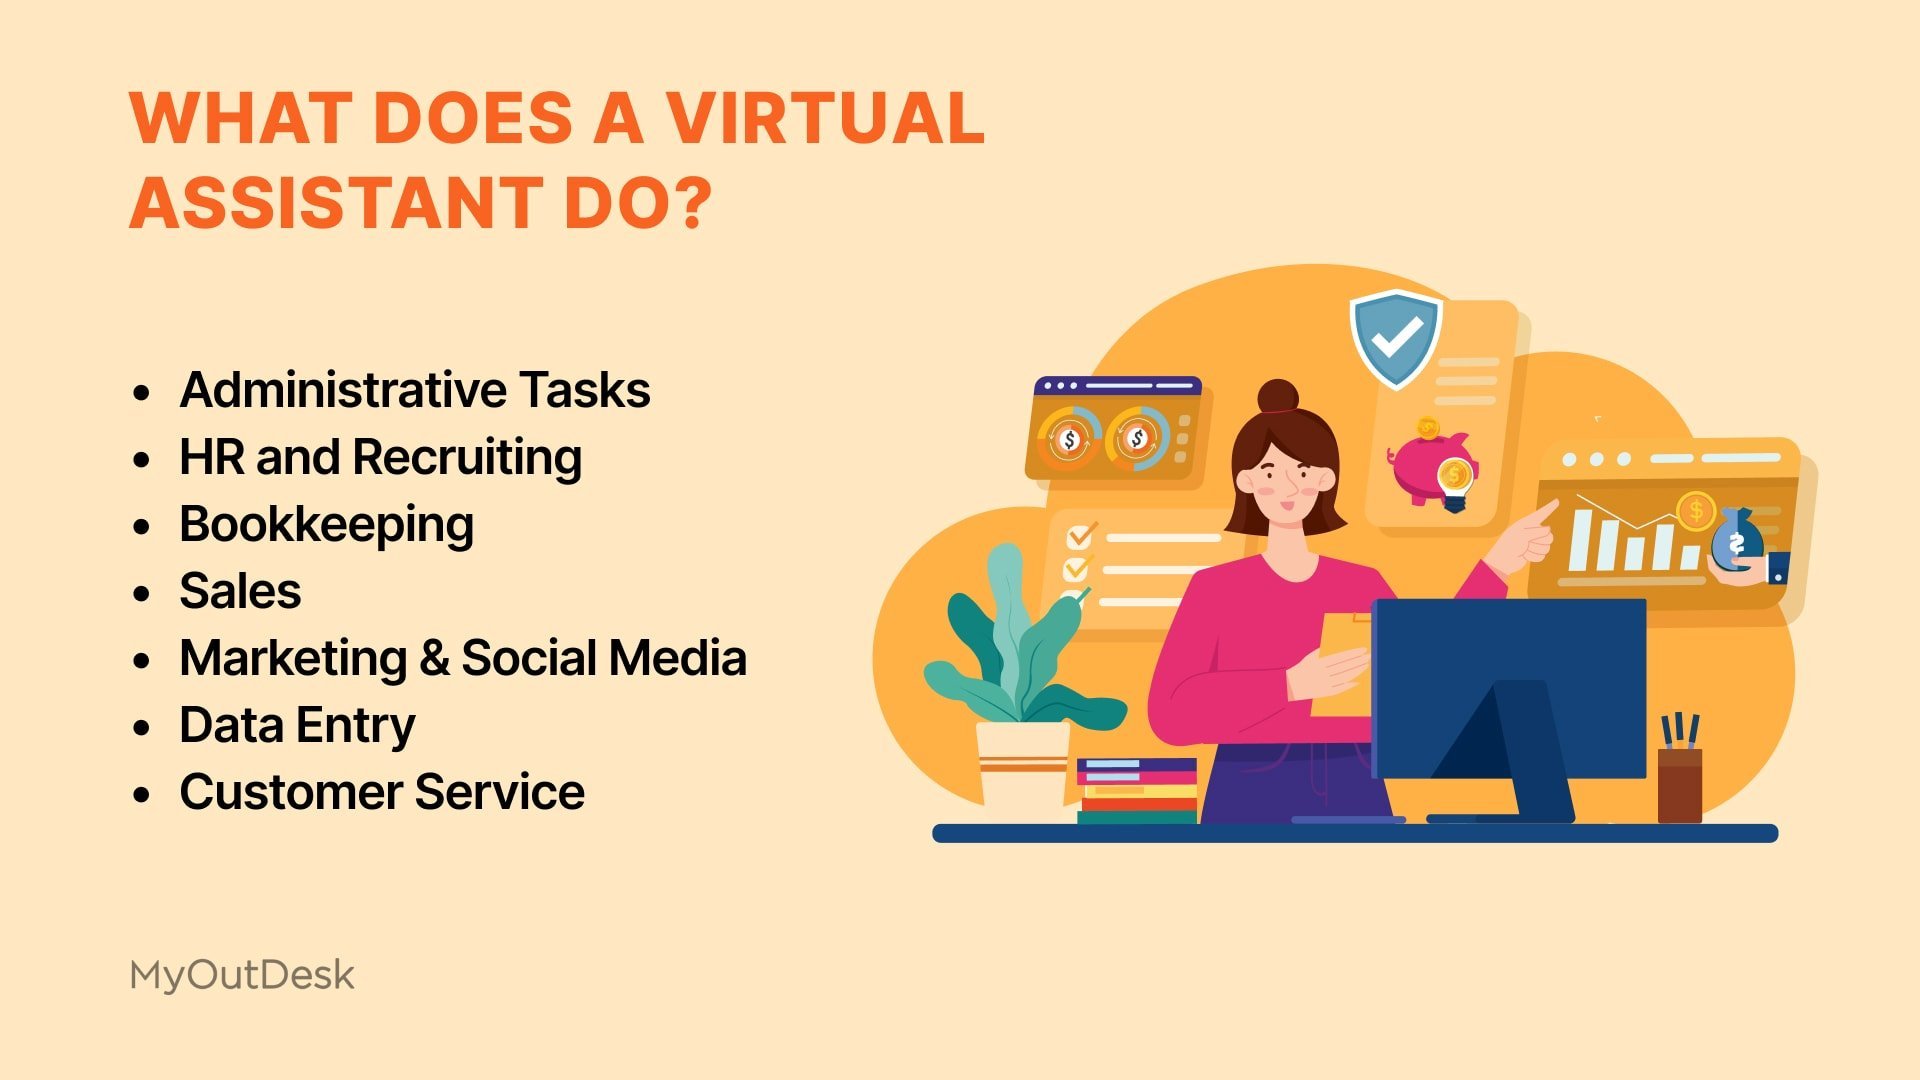 What does a virtual assistant do? Administrative tasks, HR and recruiting, bookkeeping, sales, marketing and social media, data entry, customer service, and more!